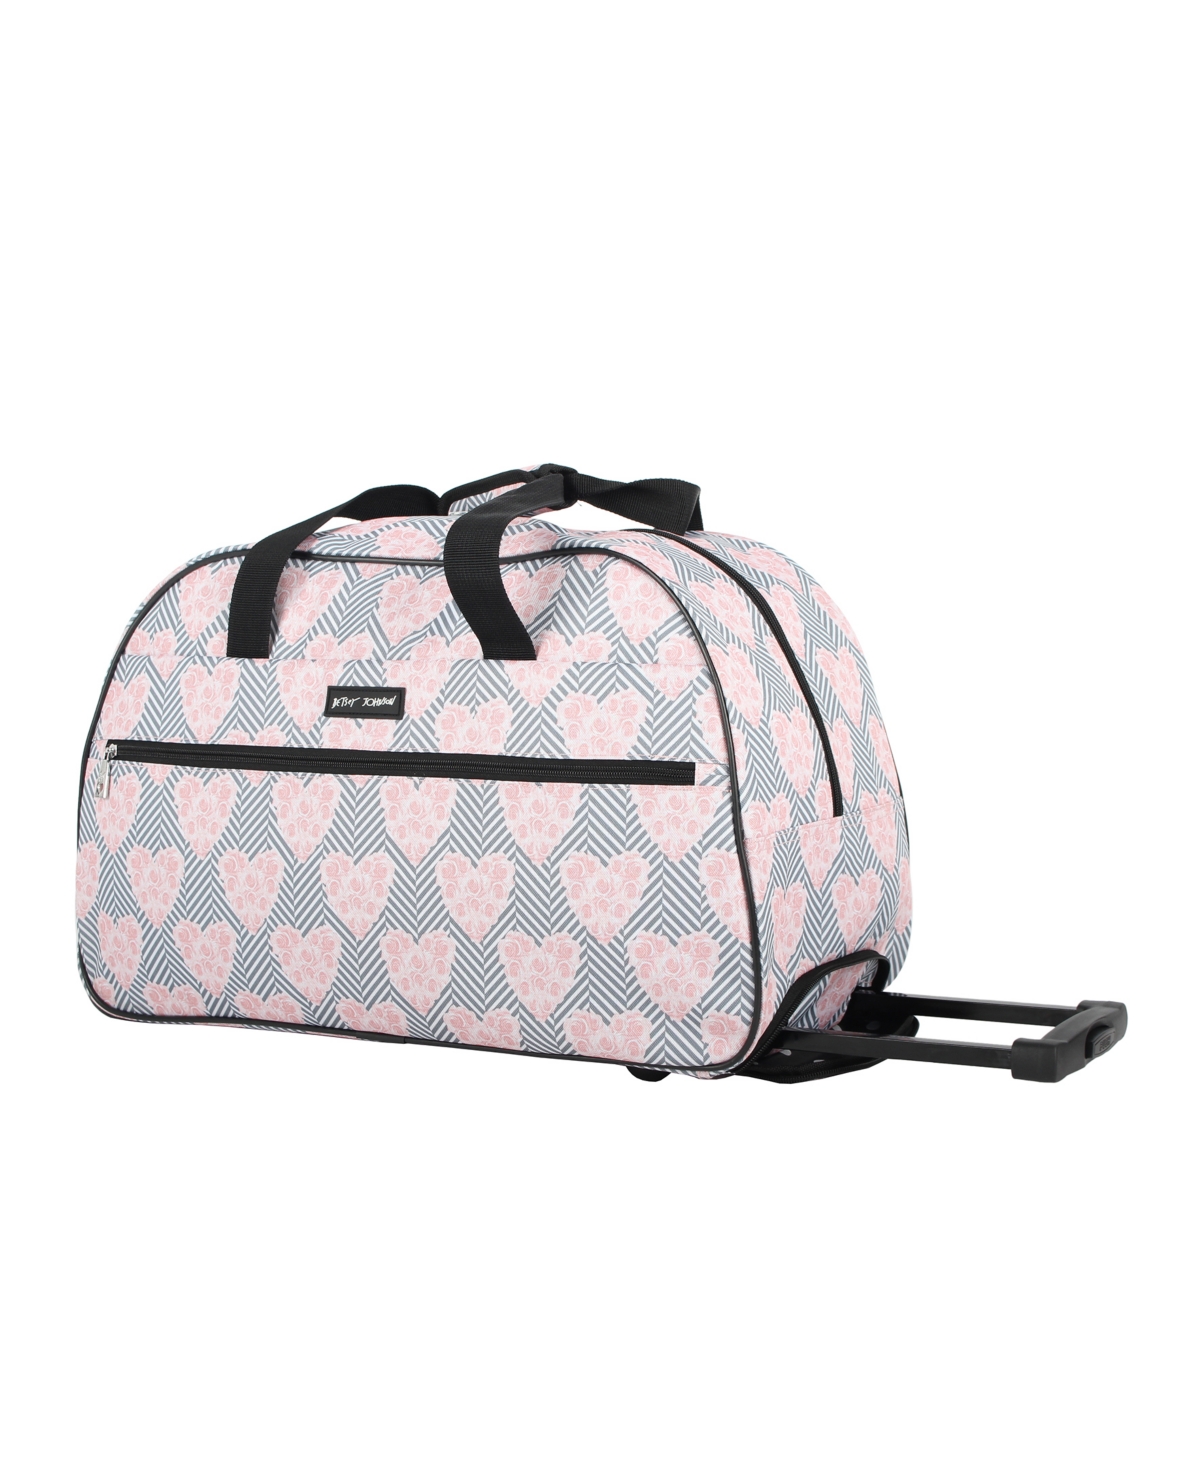 Betsey Johnson Carry-on Softside Rolling Duffel Bag In Chevron Hearts